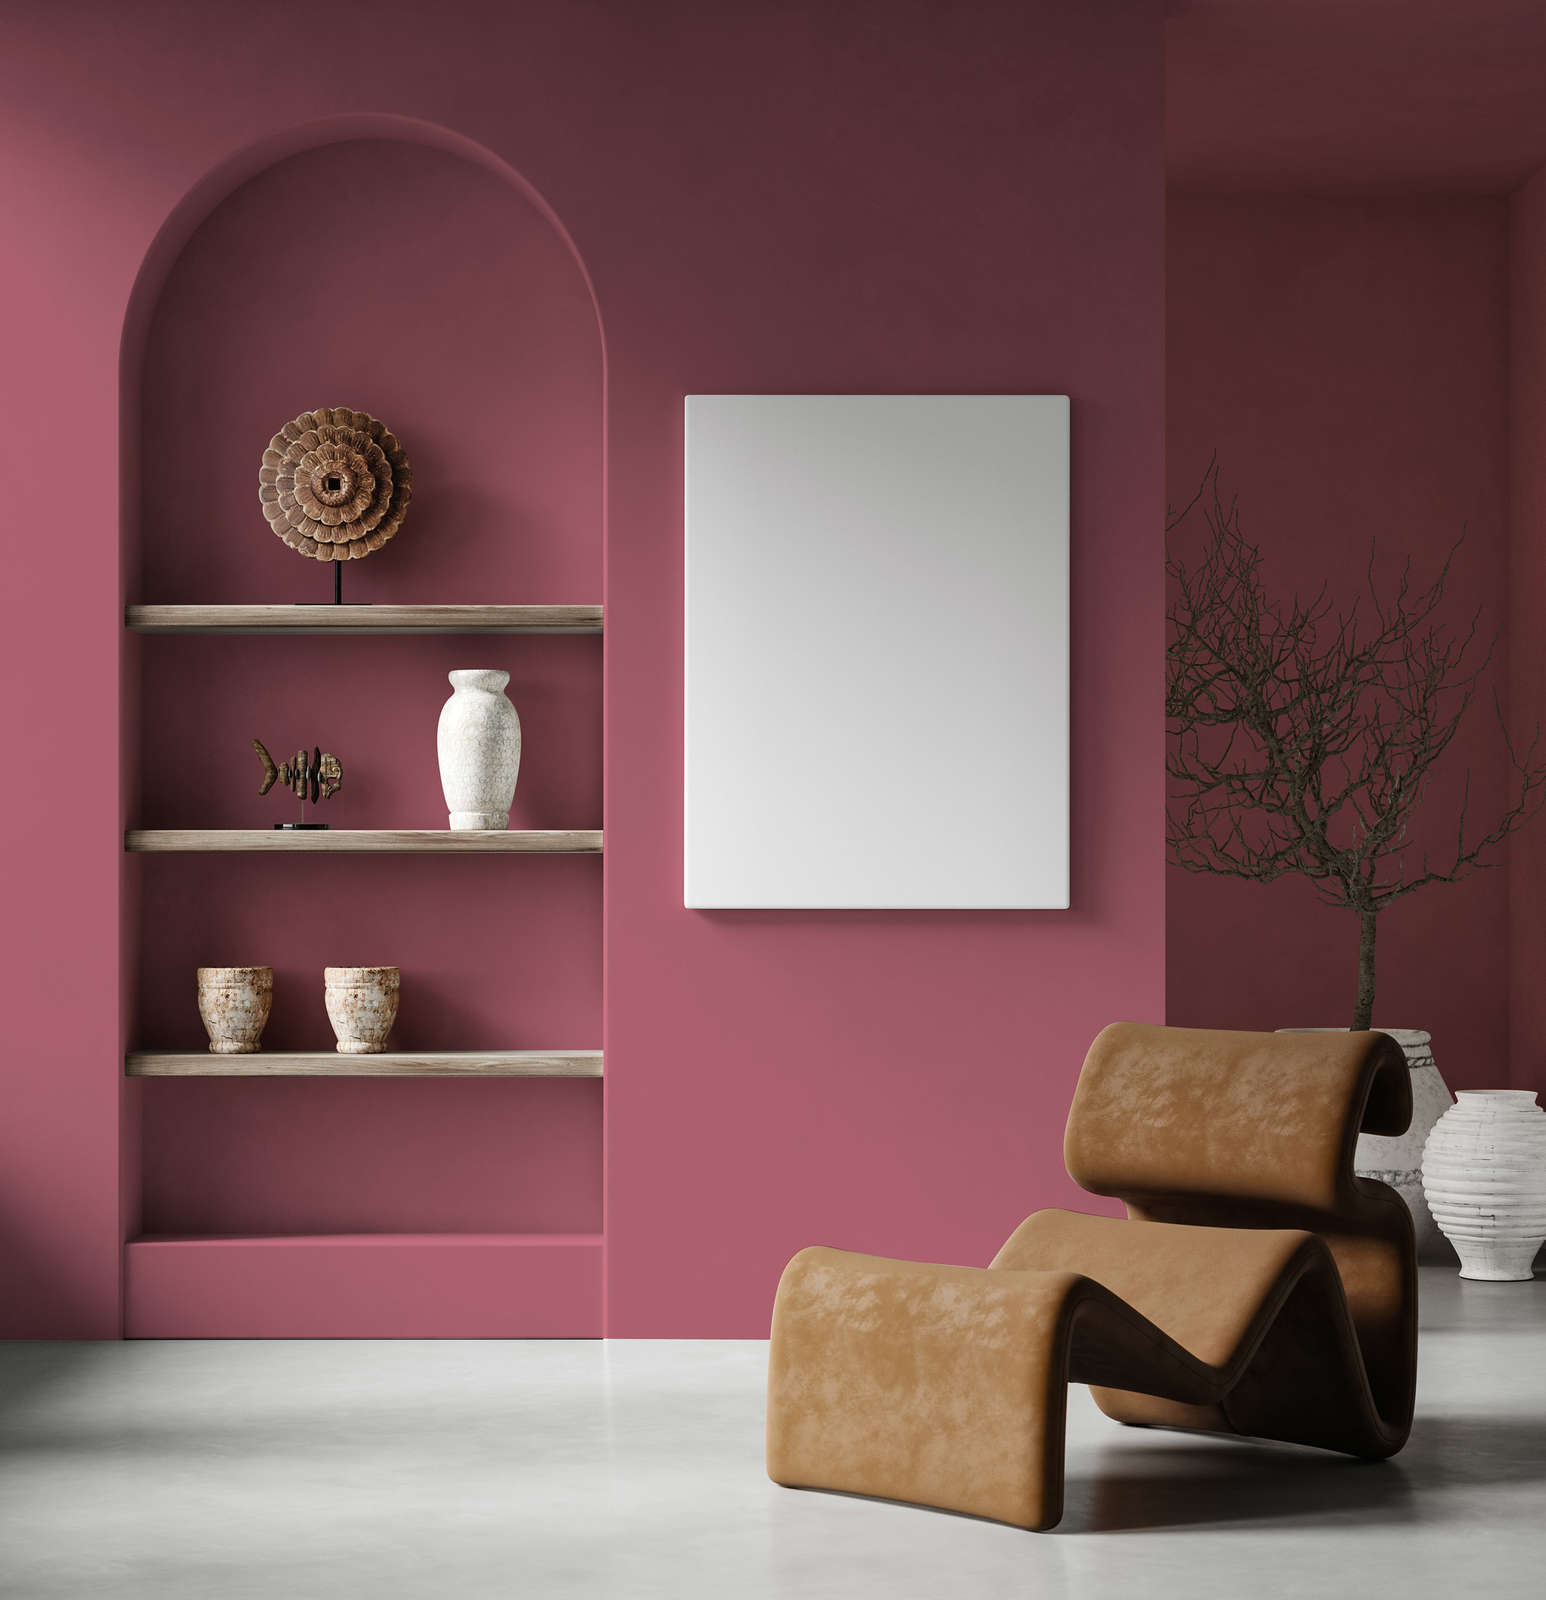             Premium Wall Paint Refreshing Dark Pink »Blooming Blossom« NW1018 – 2.5 litre
        